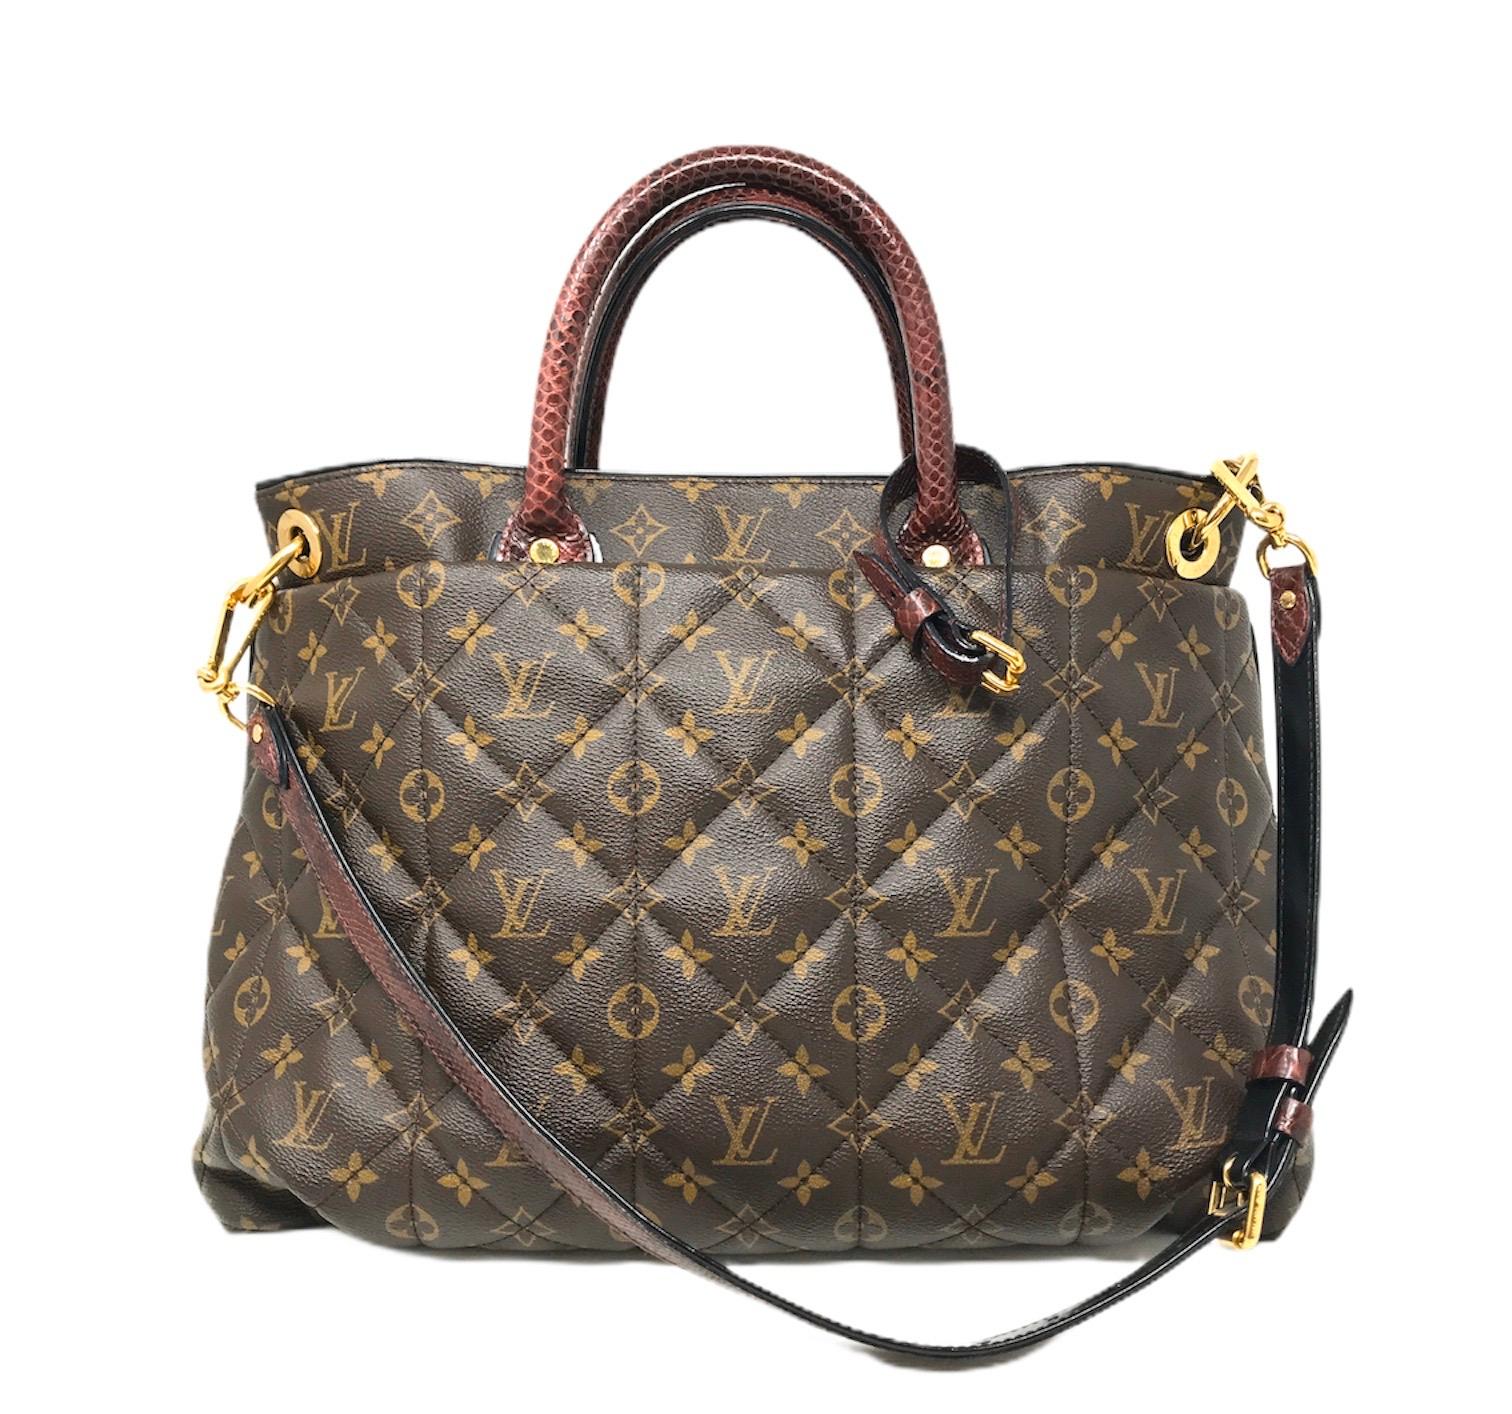 This is a fabulous, one of a kind large tote that is beautifully crafted of soft Louis Vuitton monogram diamond quilted canvas. The bag features python top handles, a python shoulder strap, ostrich leather lining, polished brass hardware as well as